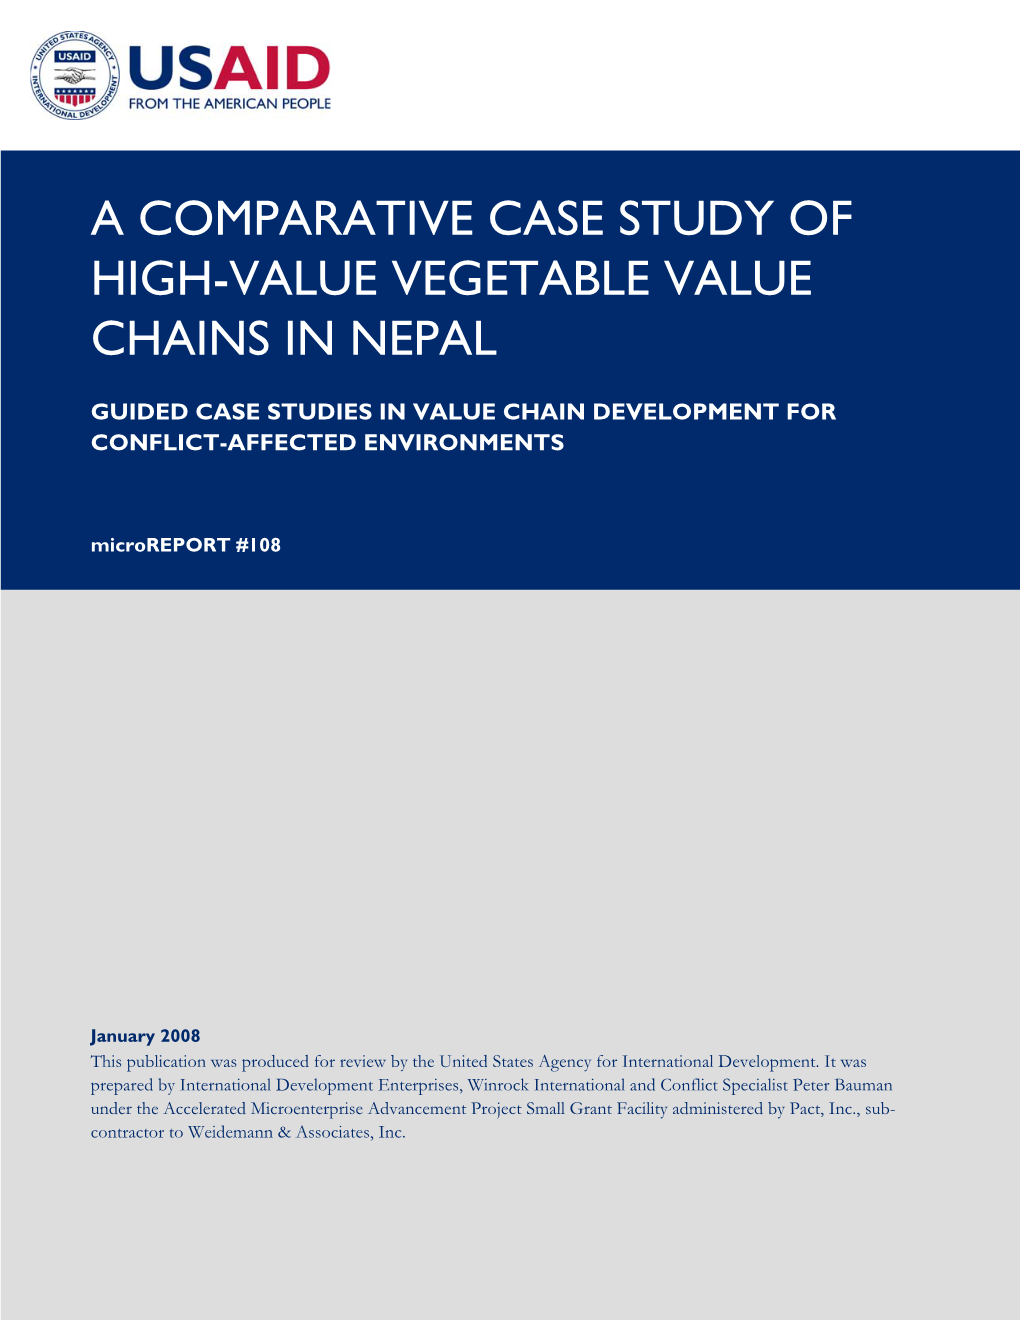 A Comparative Case Study of High-Value Vegetable Value Chains in Nepal